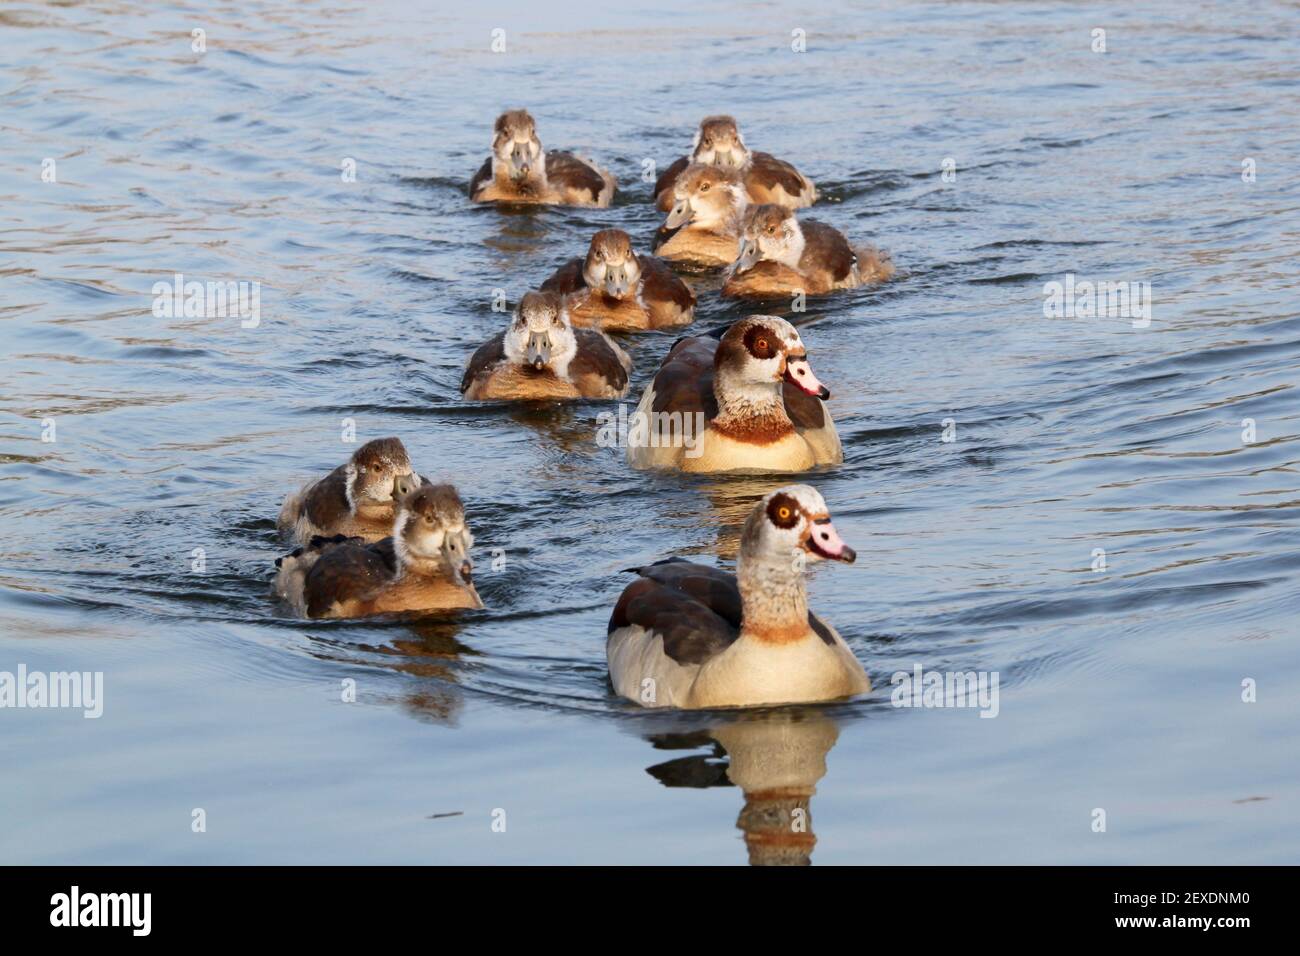 Pair of Egyptian Geese (Alopochen aegyptiacus) with eight goslings, Sadlers Ride, Hurst Park, East Molesey, Surrey, England, Great Britain, UK, Europe Stock Photo